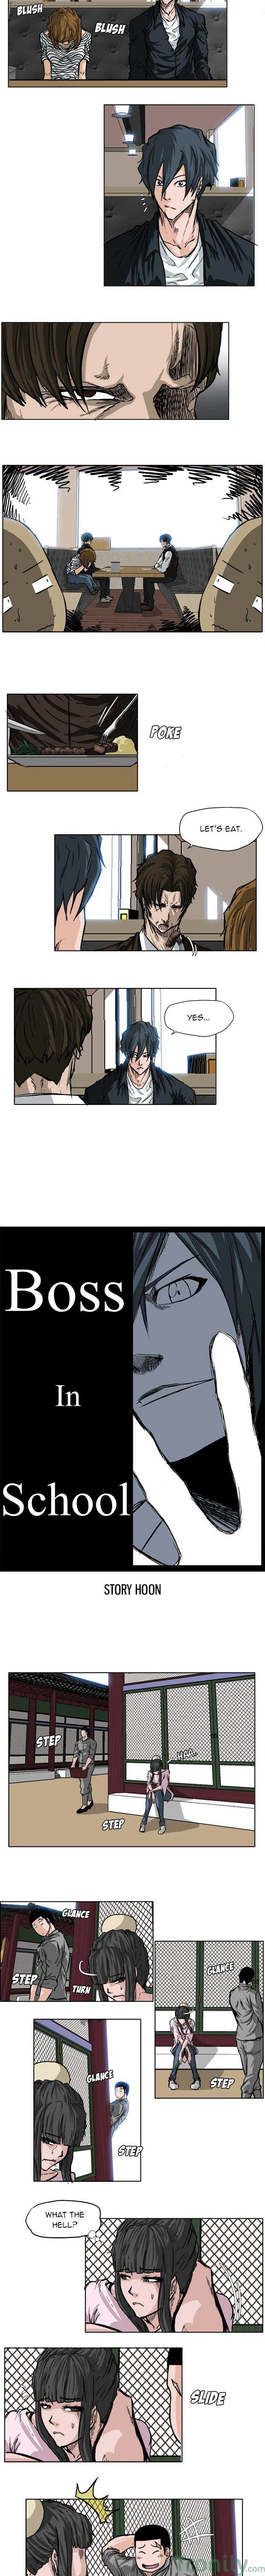 Boss in School Chapter 51 page 3